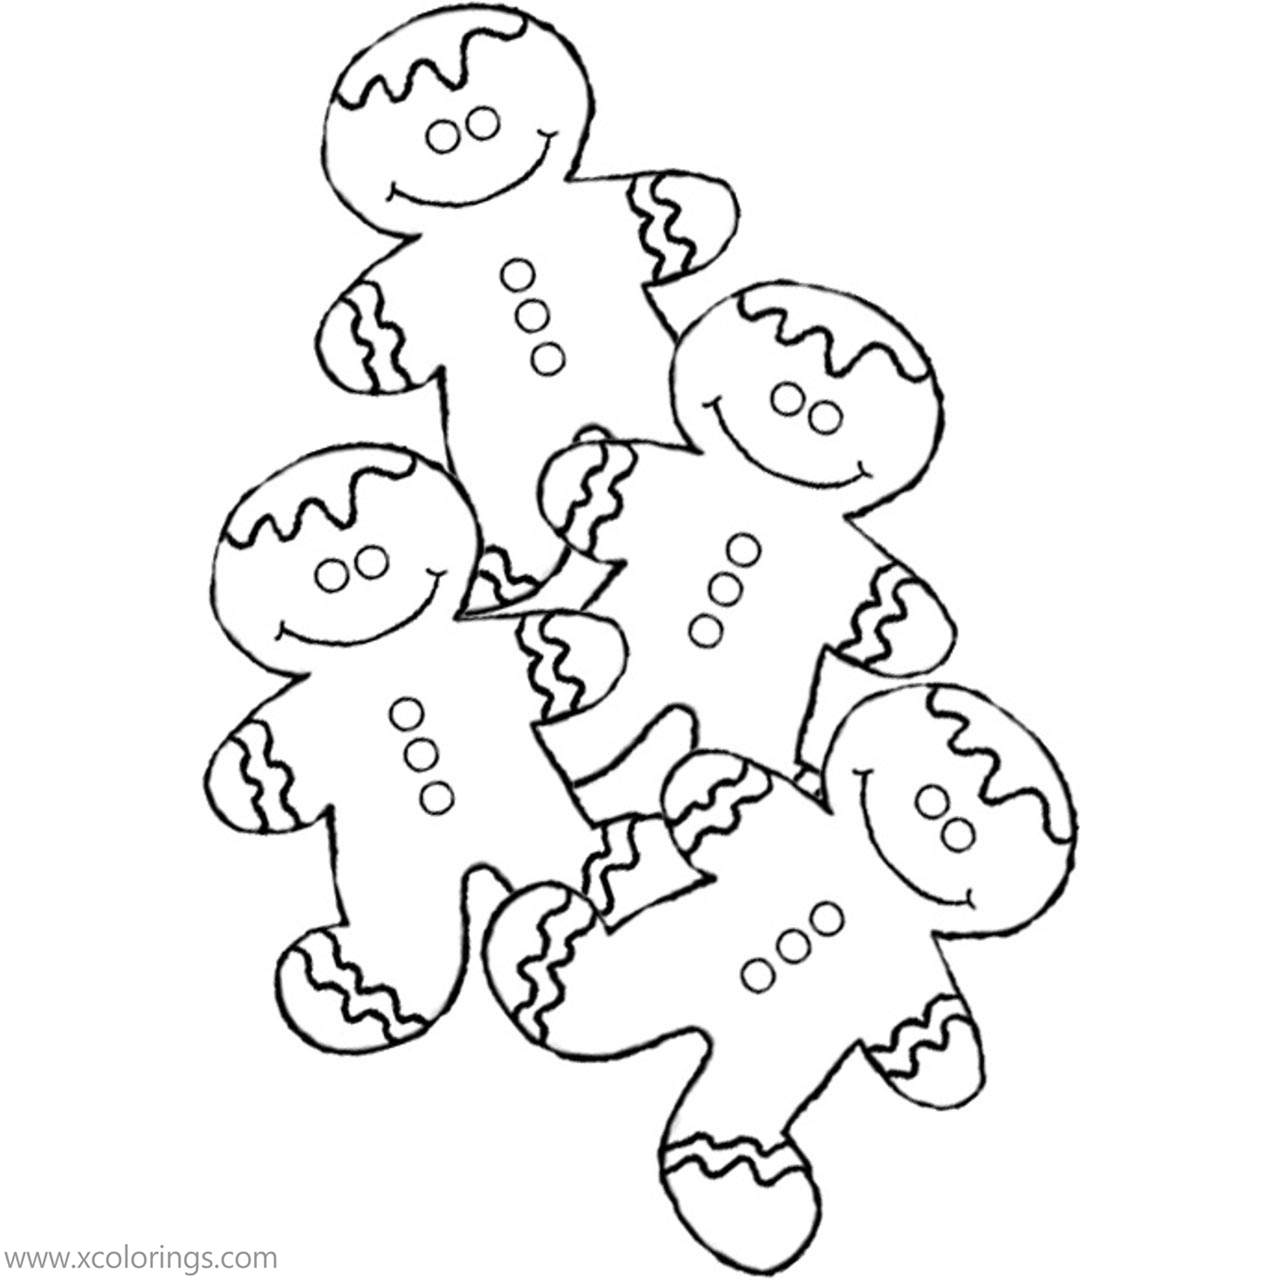 Free Four Gingerbread Men with Hat Coloring Pages printable